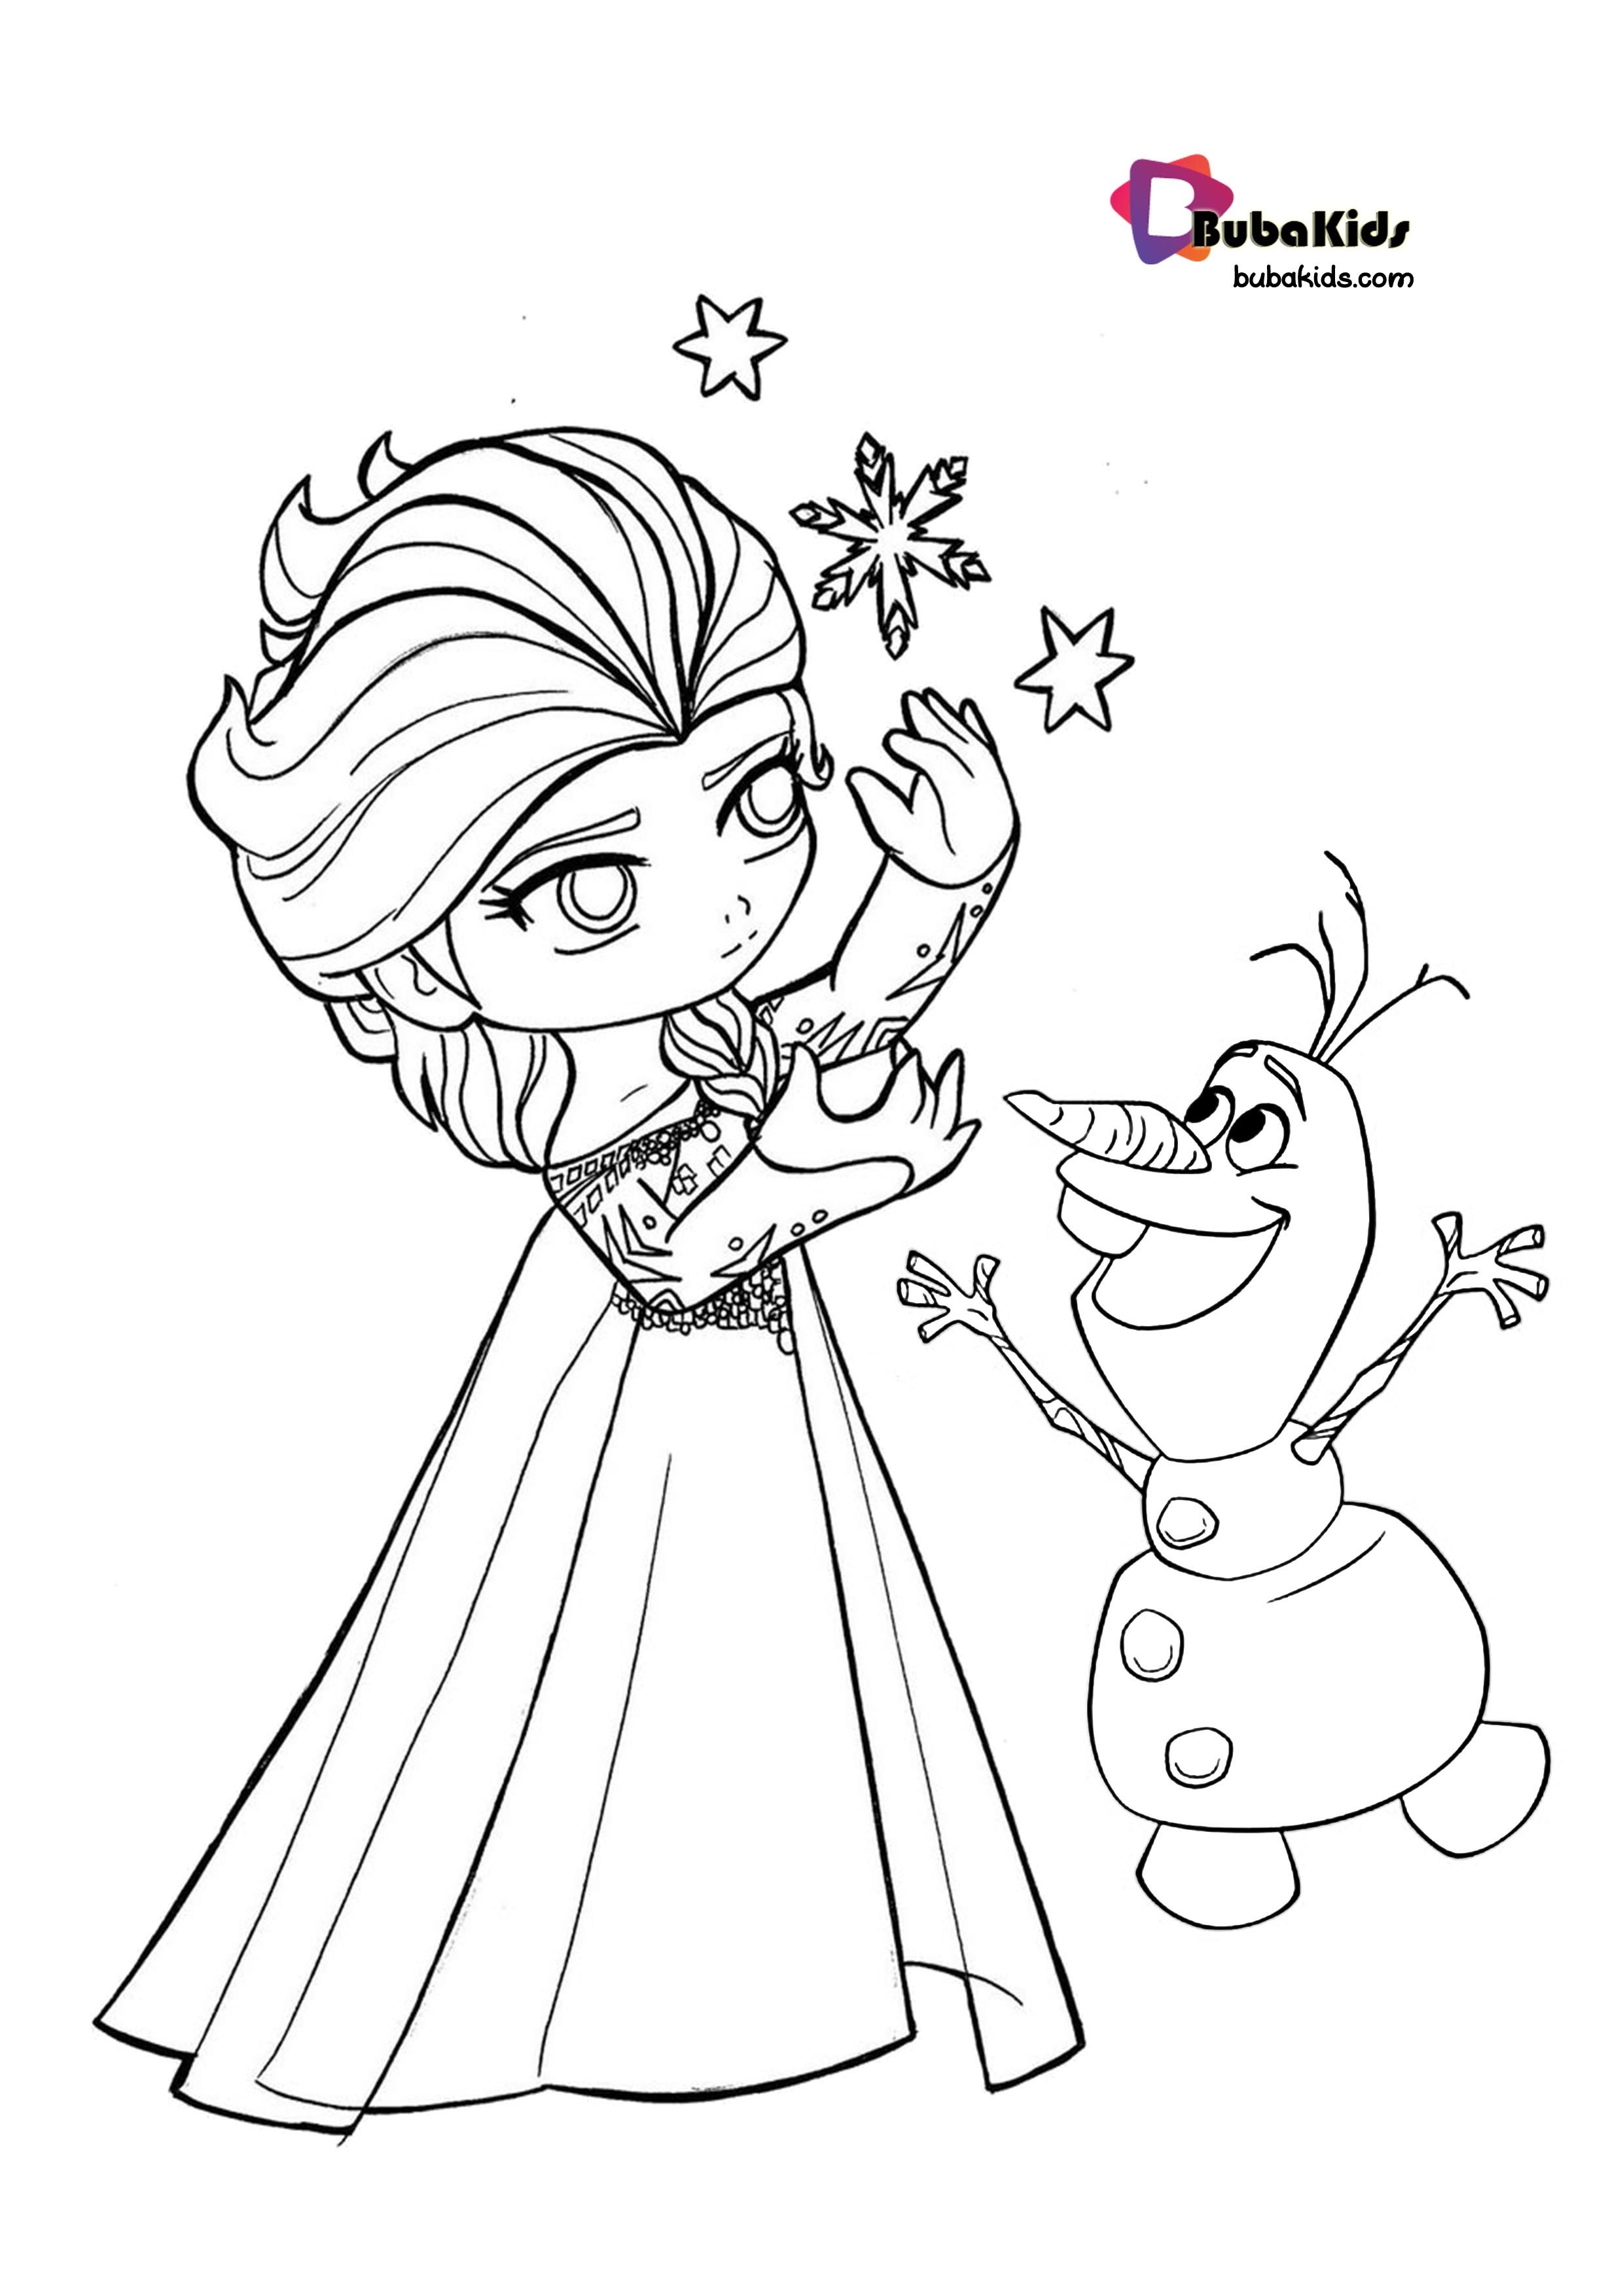 Cool Little Princess 5 Coloring Page